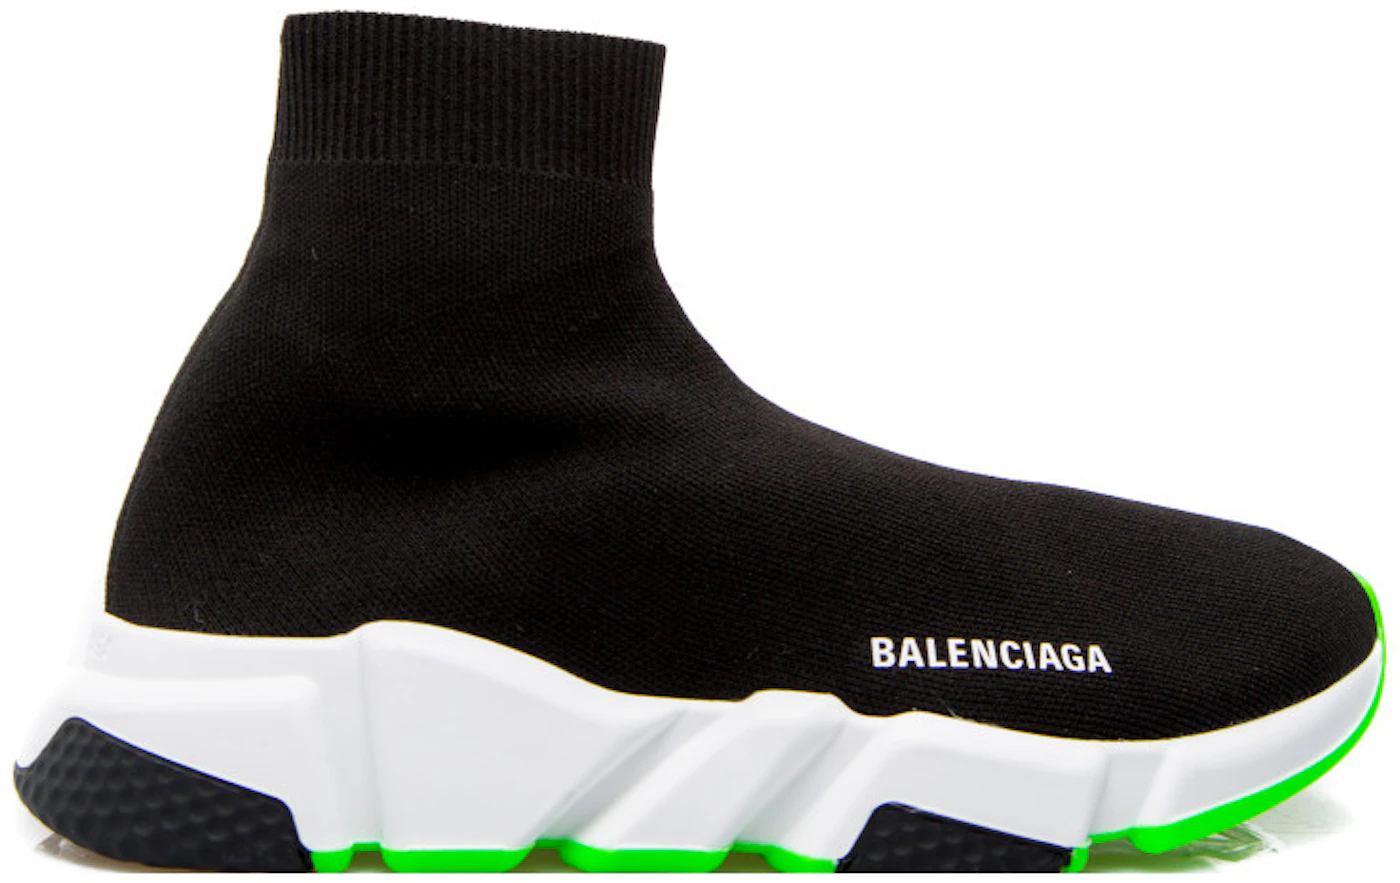 balenciaga Speedy Trainer arrived in store. #smets